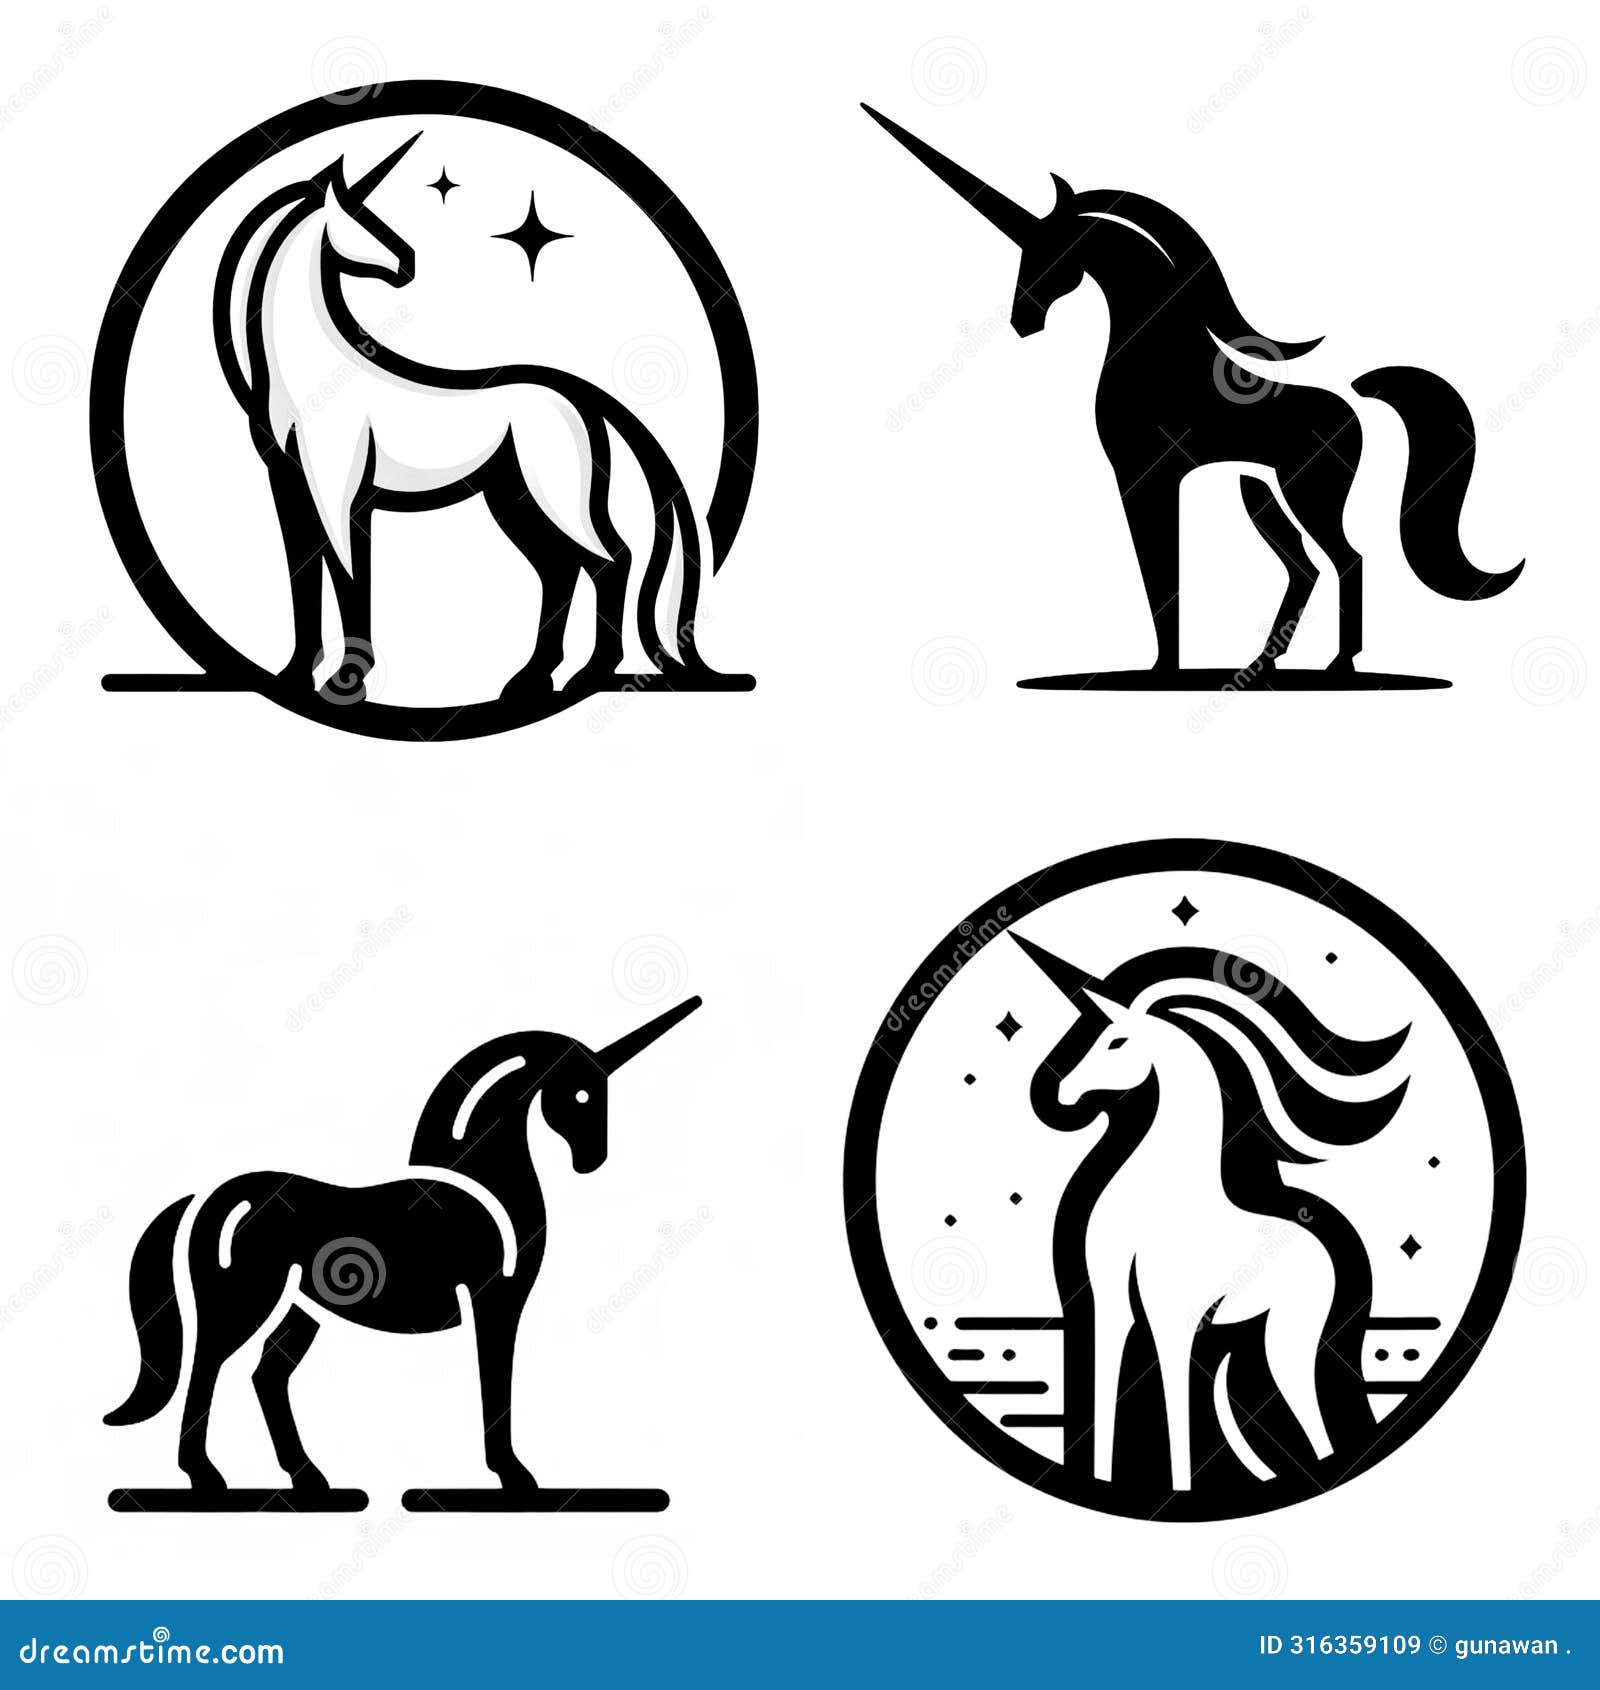 a collection of four simple and memorable licorne logos